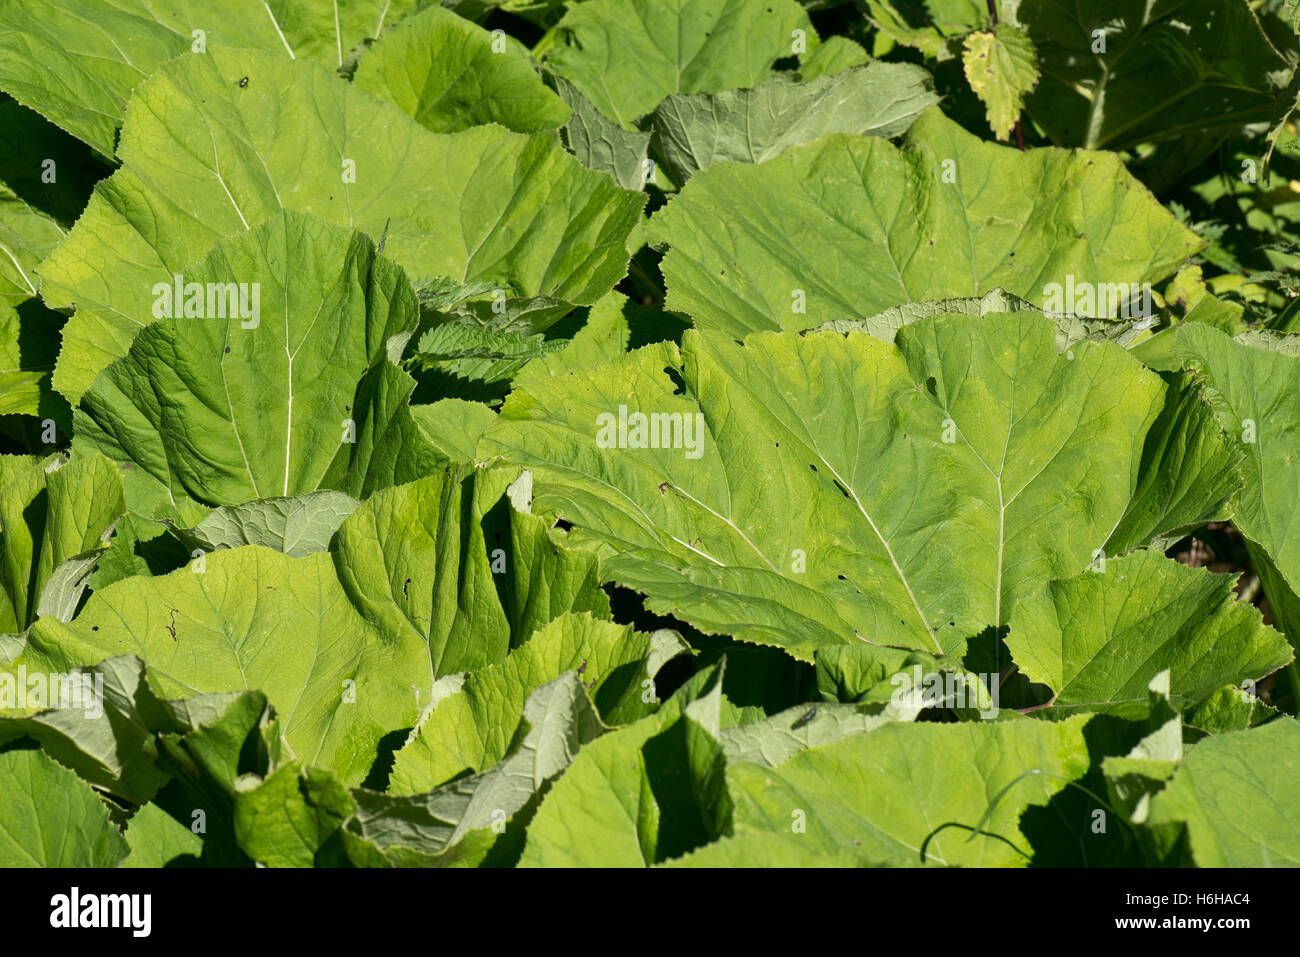 Large leaves of butterbur in summer, Petasites hybridus, on the canal bank at Hungerford, July Stock Photo